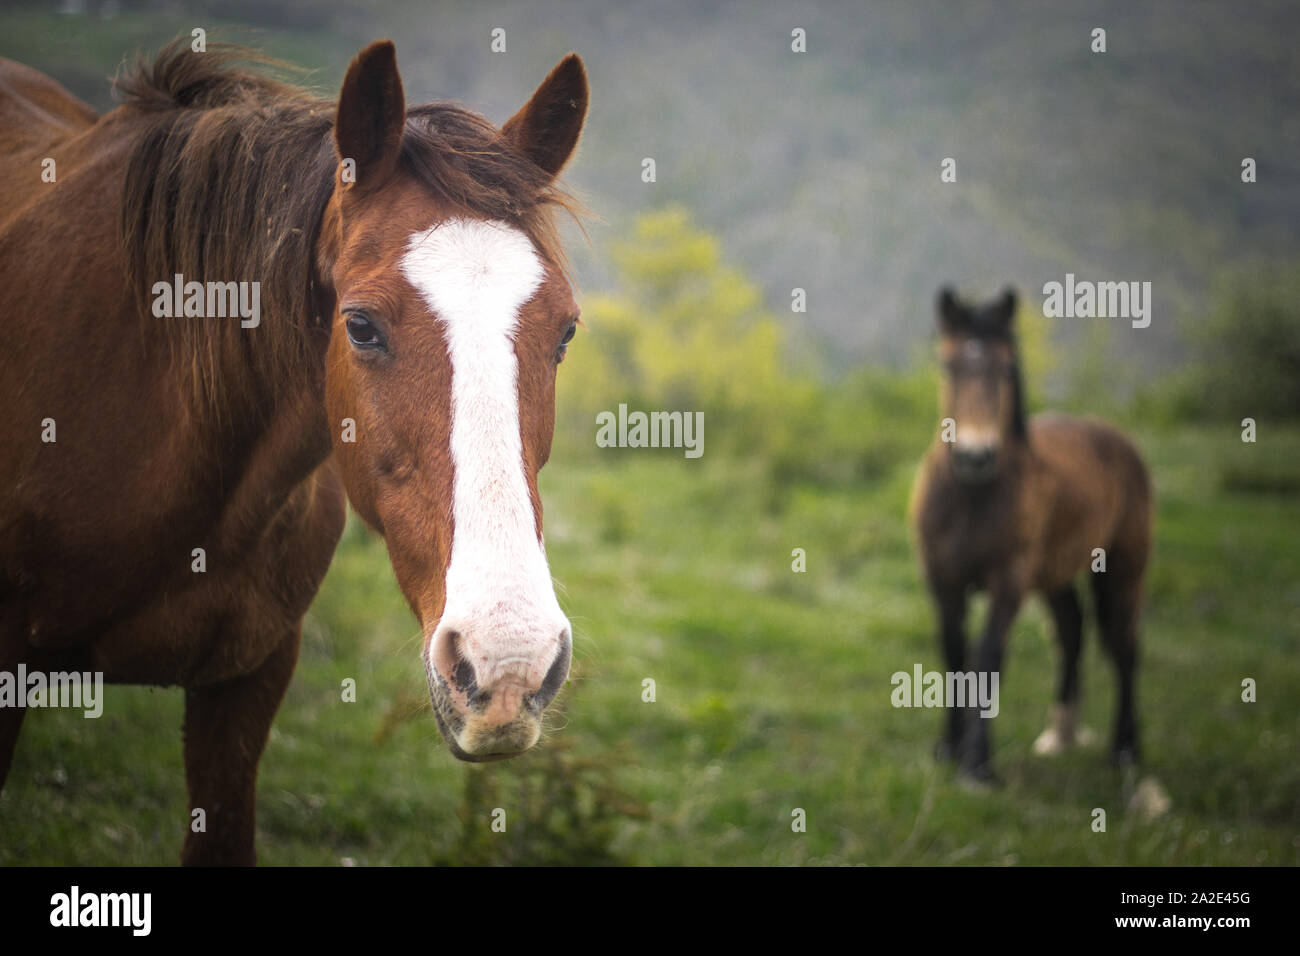 Horses and Hors in Country, wildlife and domestic animal Stock Photo